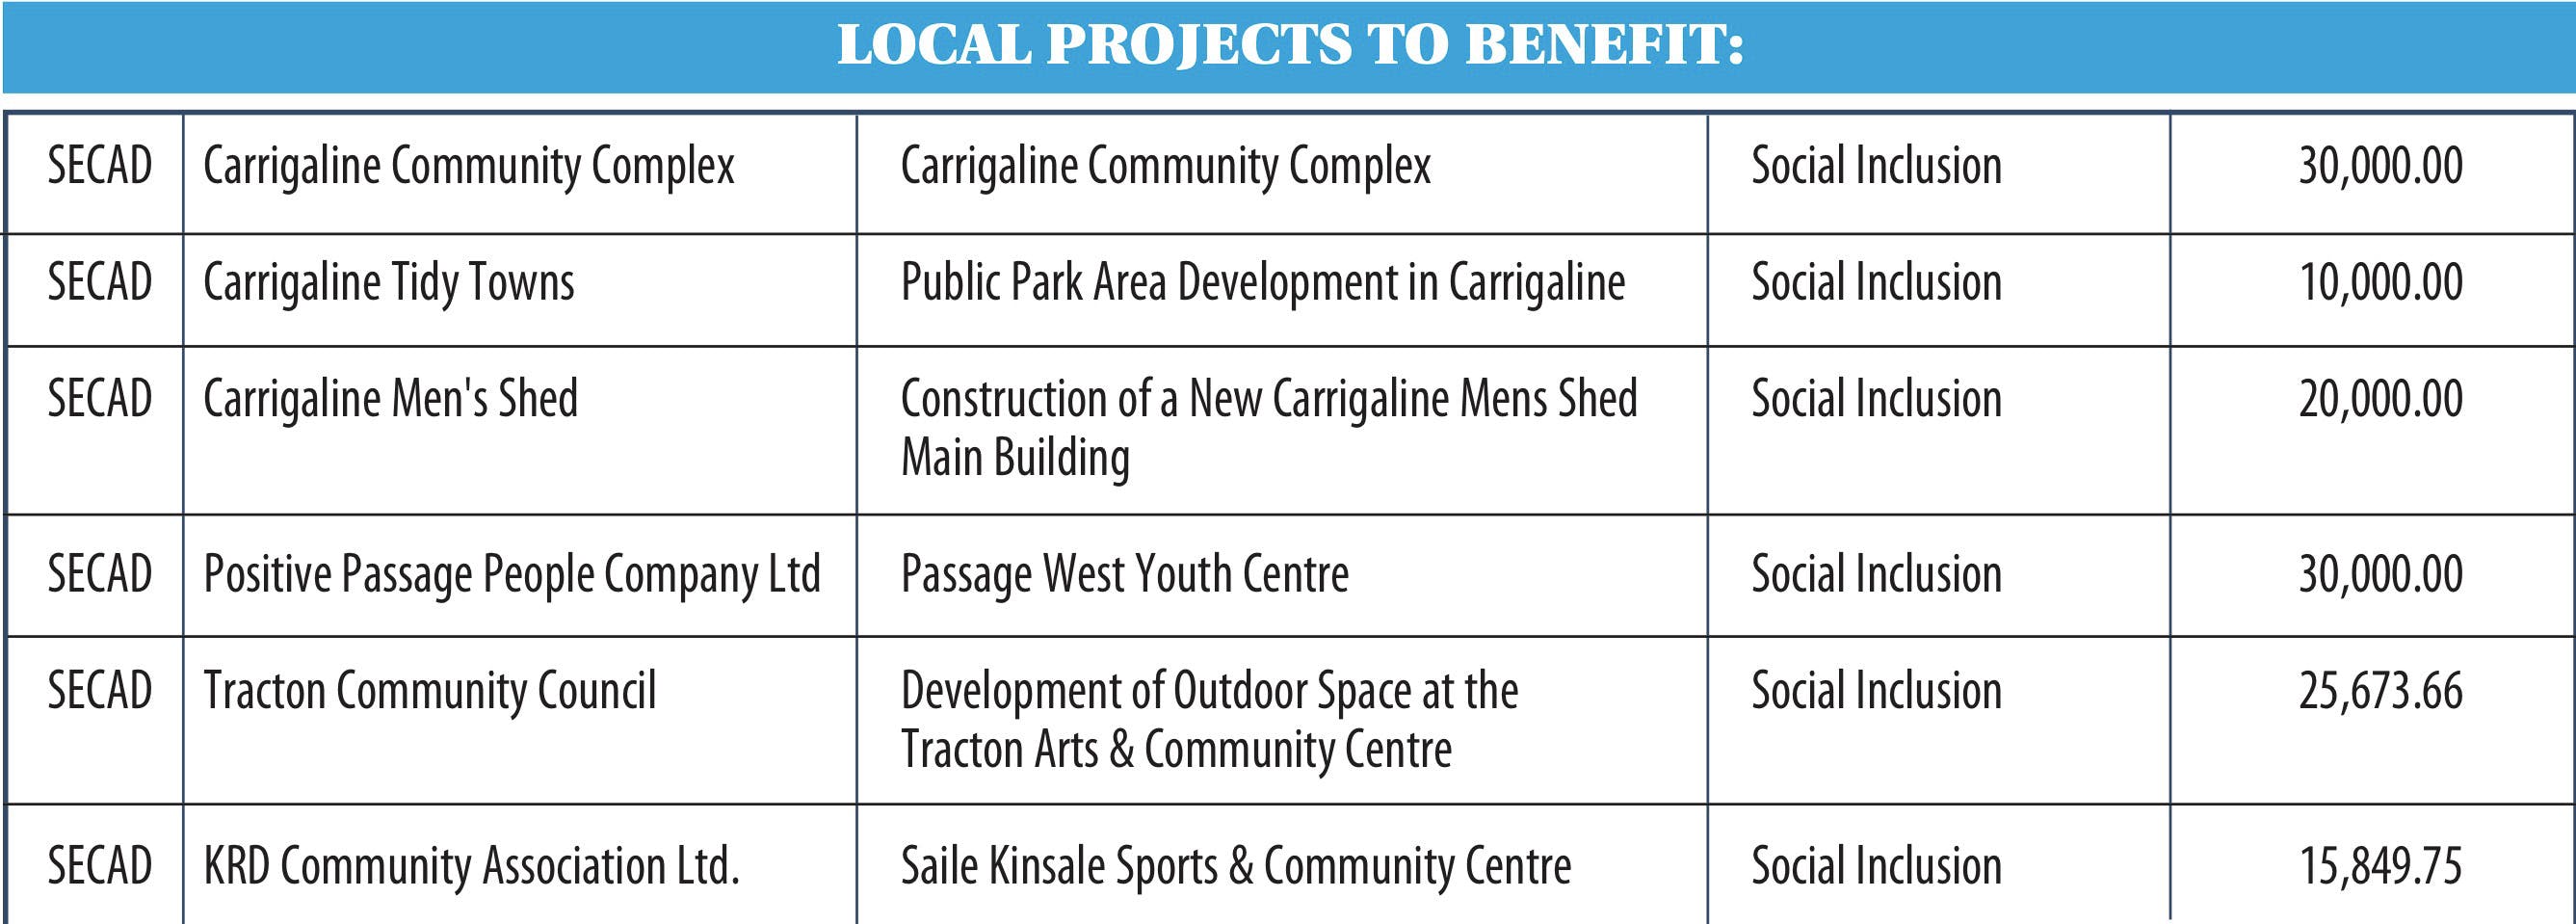 LEADER Funding For Local Projects 